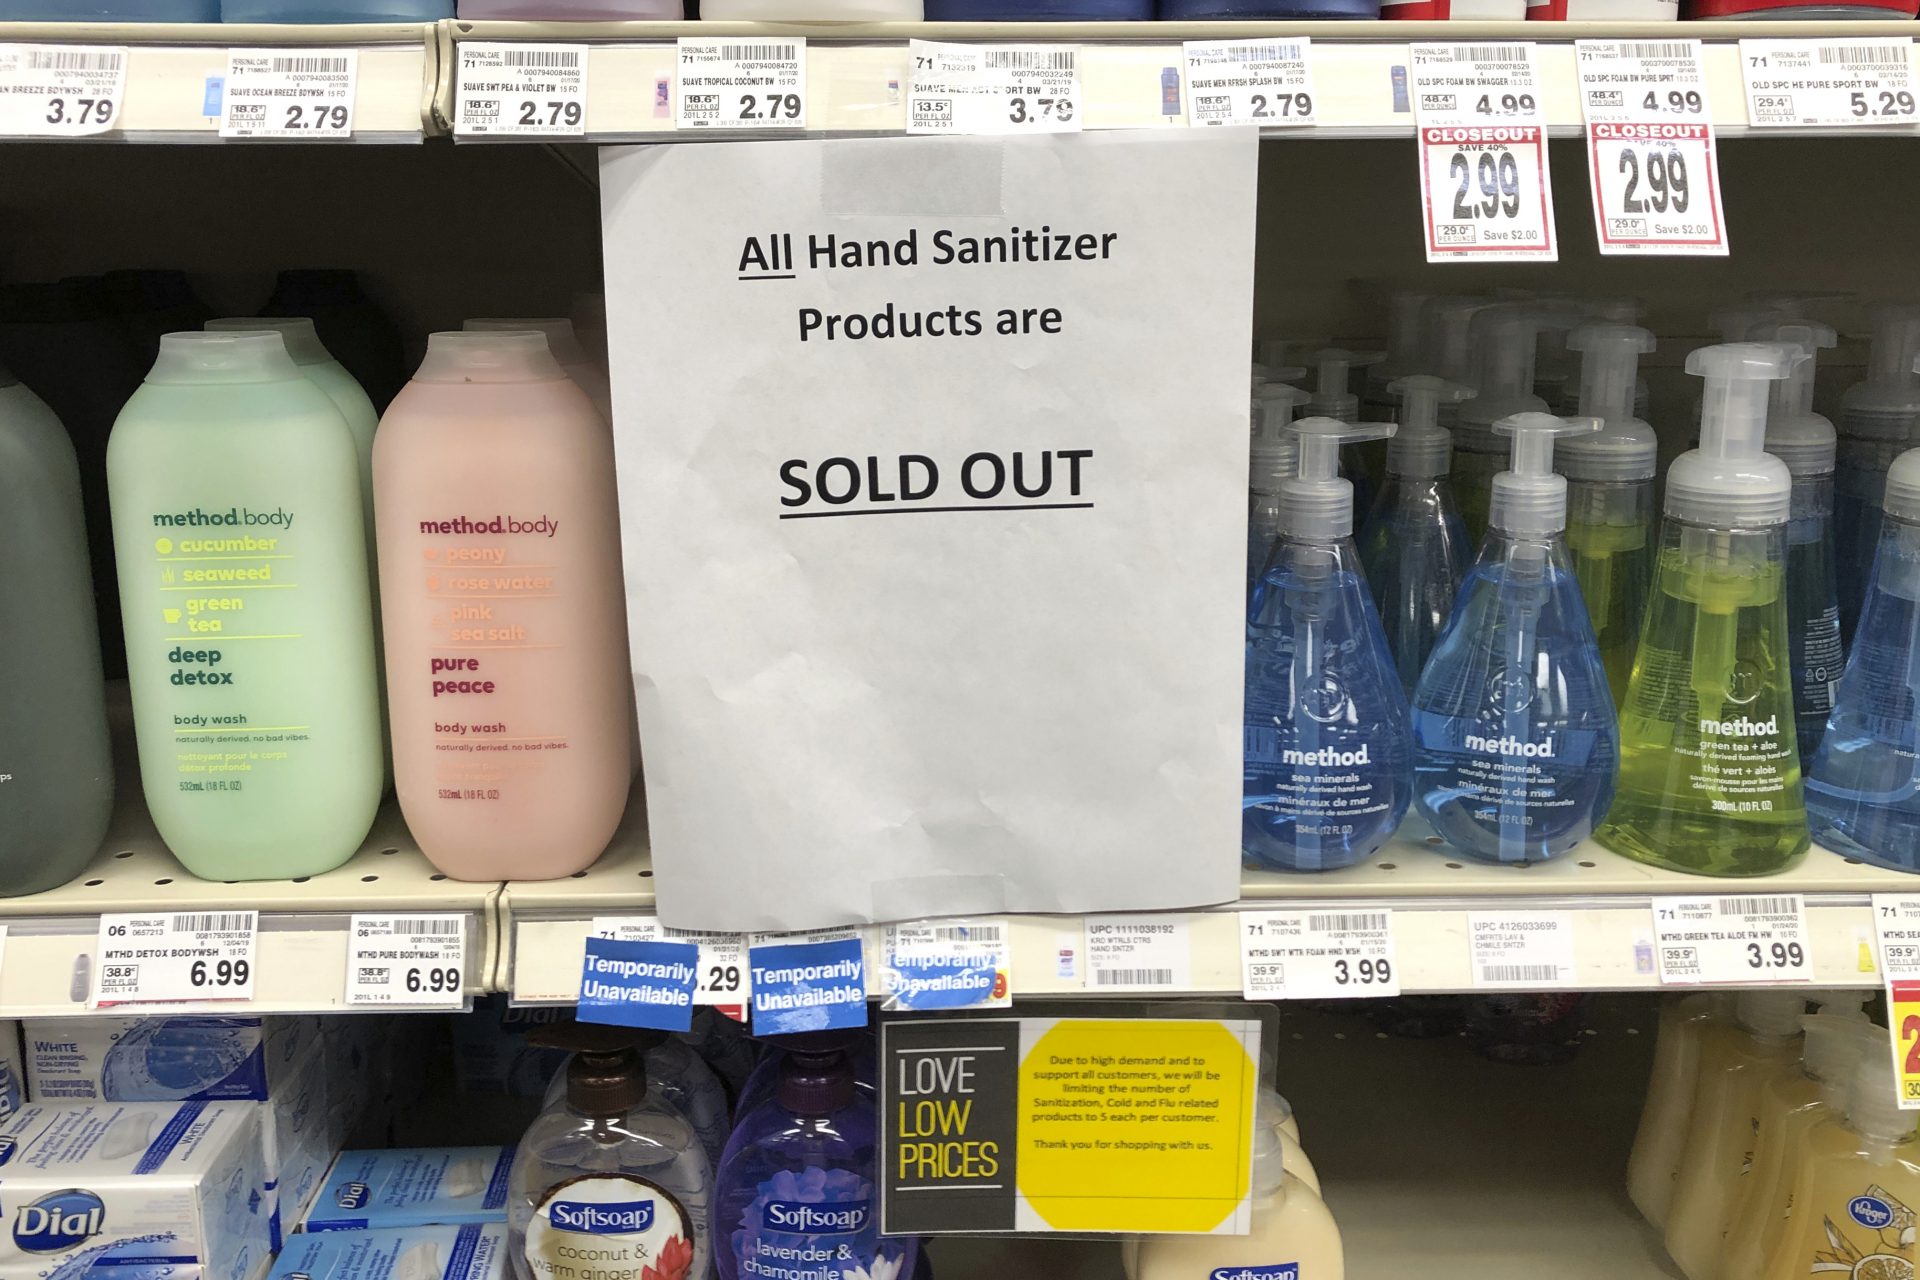 A sign on a shelf at a QFC grocery store in Kirkland, Wash., advises shoppers Tuesday, March 3, 2020 that all hand sanitizer products are sold out. Fear of the coronavirus has led people to stock up on the germ-killing gel, leaving store shelves empty and online retailers with sky-high prices set by those trying to profit on the rush. The store is located near the Life Care Center of Kirkland, which has been tied to several cases of the COVID-19 coronavirus.